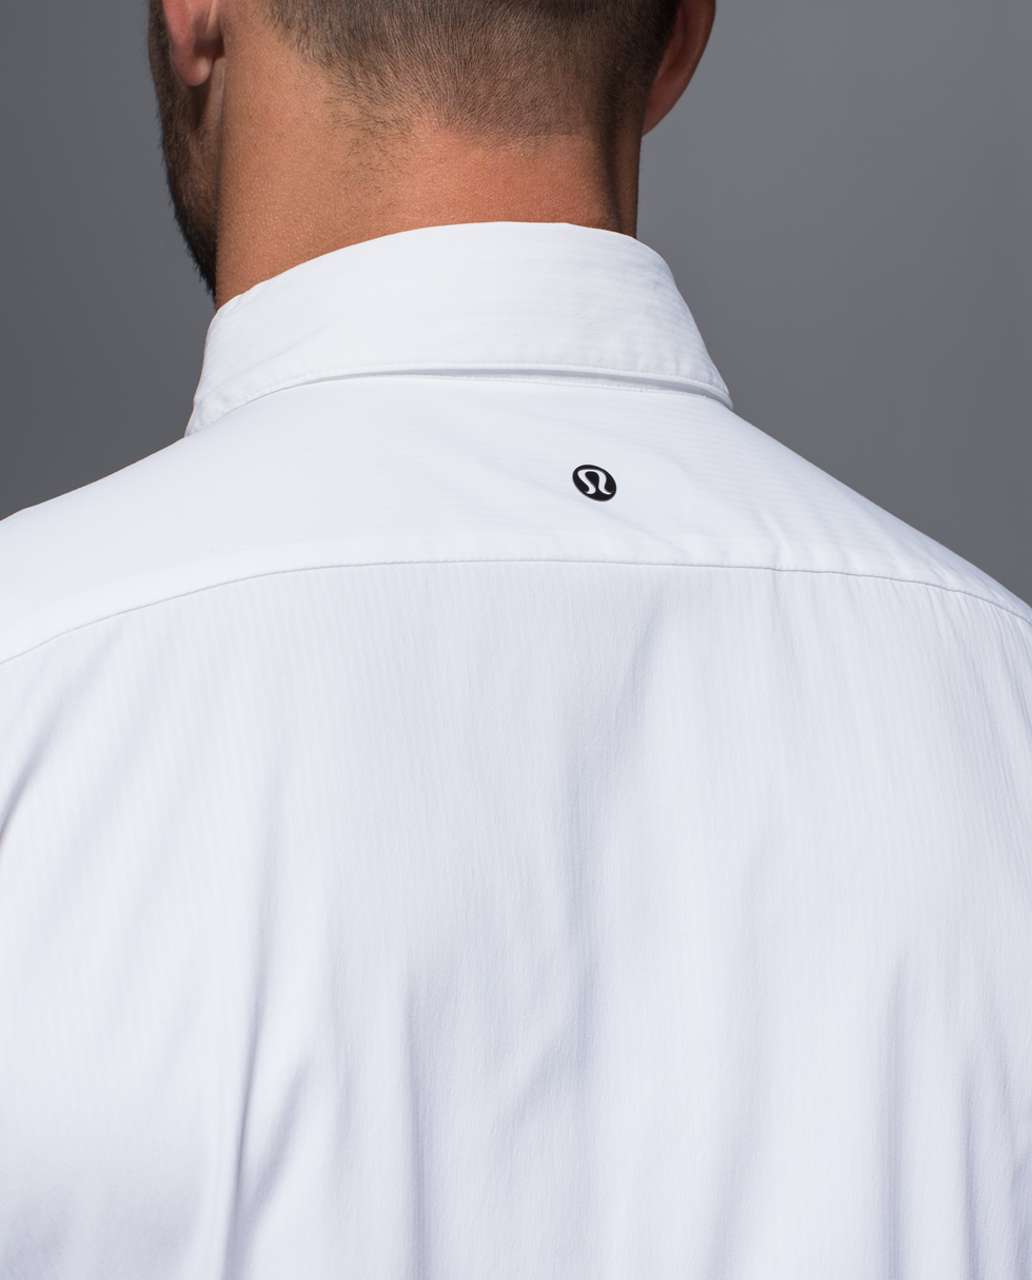 Lululemon Mission Long Sleeve Button Down - White